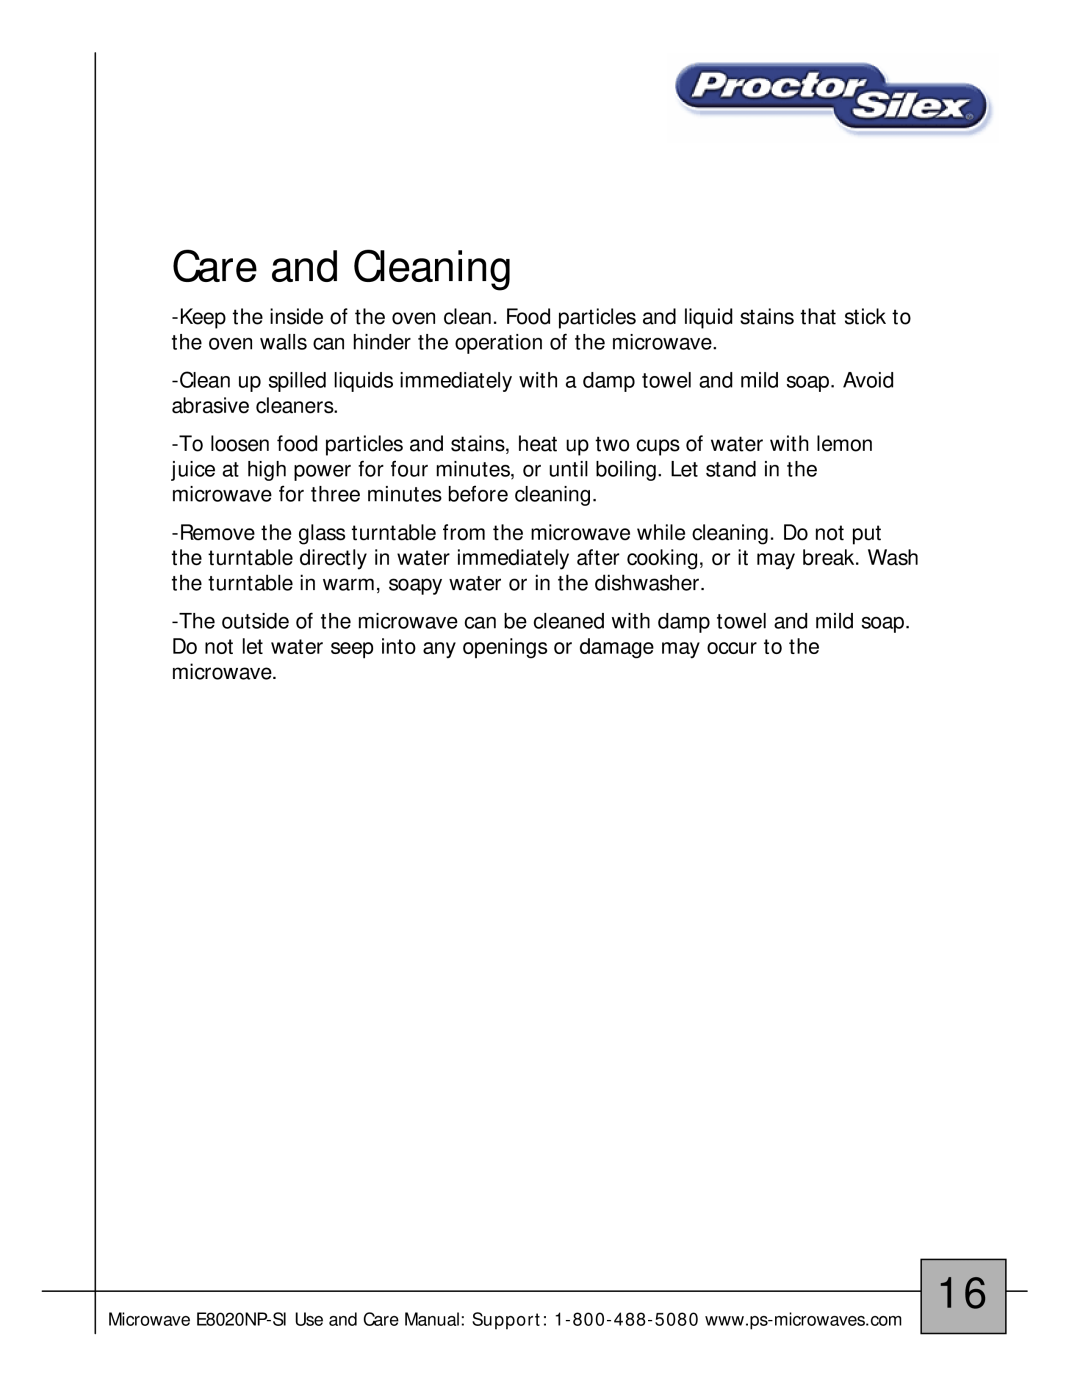 Proctor-Silex E8020NP-SI owner manual Care and Cleaning 